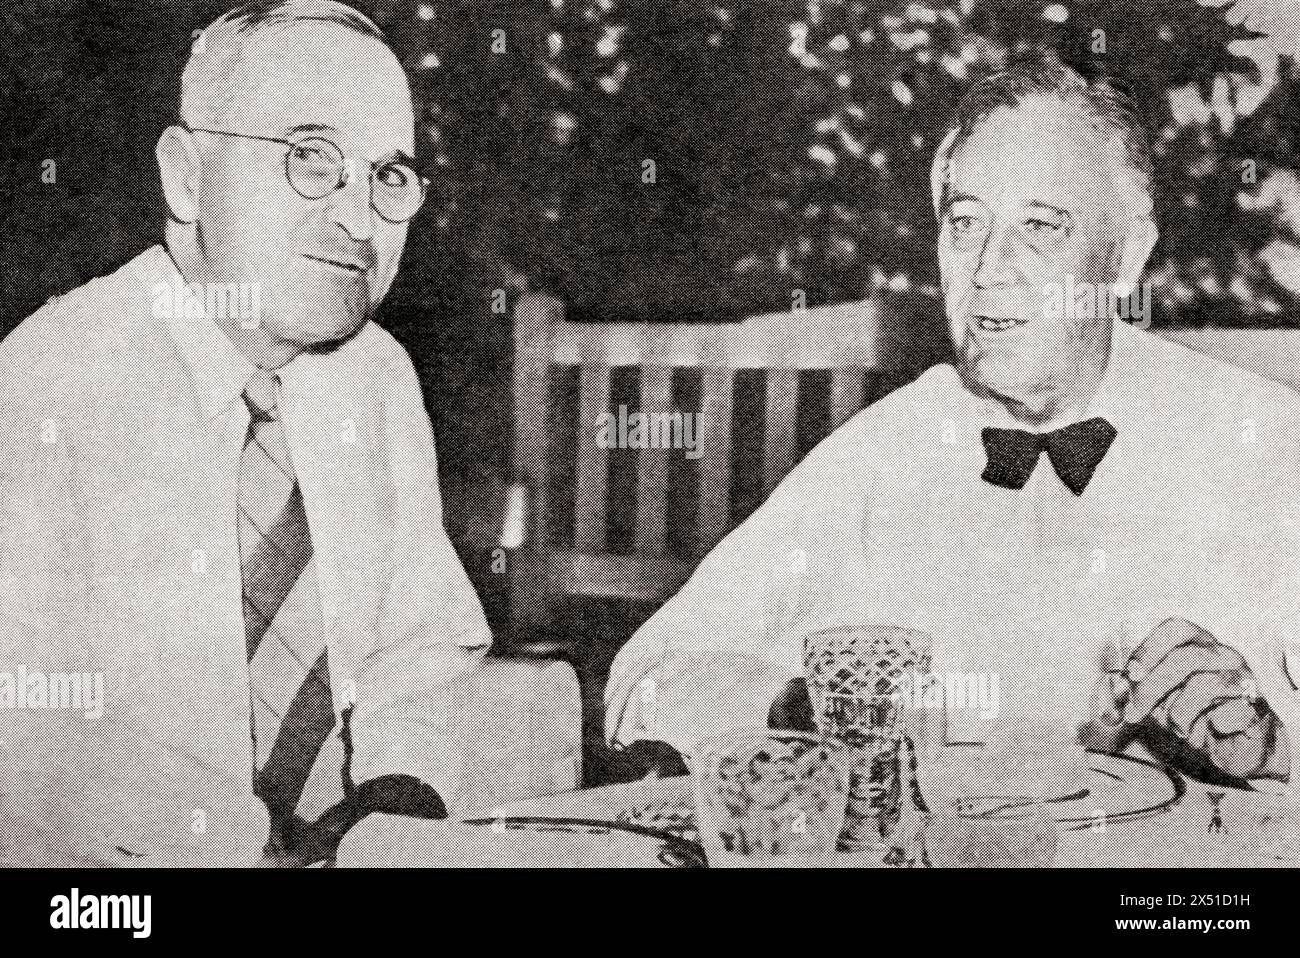 One of the last photographs of President Roosevelt, right, and his successor vice-president Truman, 1945. Harry S. Truman, 1884 – 1972.  33rd president of the United States.  Franklin Delano Roosevelt, 1882 –1945, commonly known by his initials FDR. American statesman, politician and 32nd president of the United States.  From The War in Pictures, Sixth Year. Stock Photo